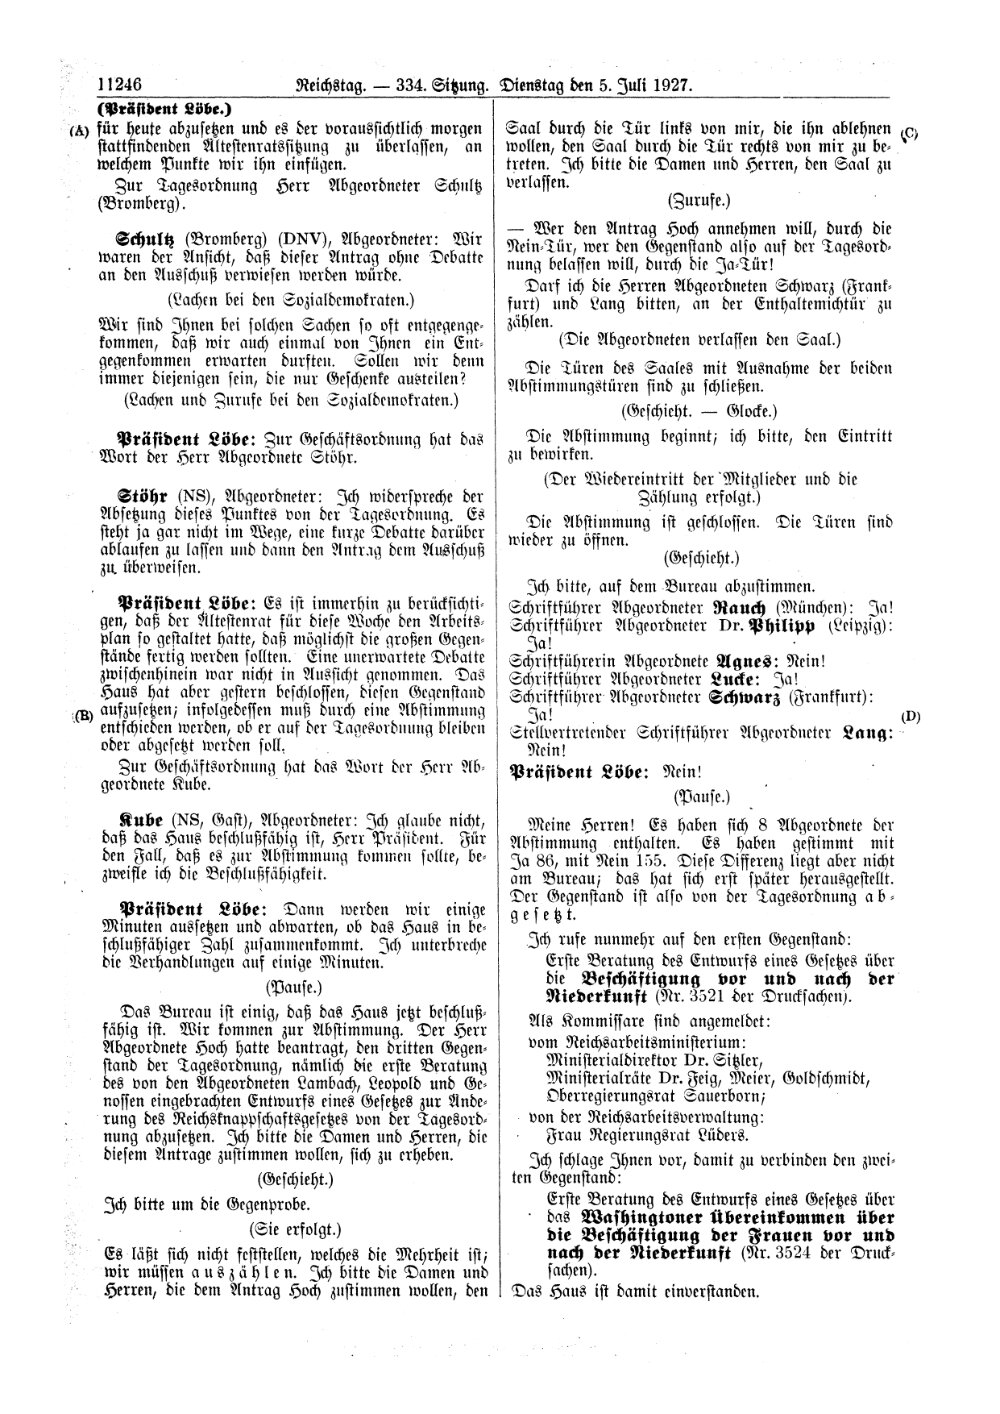 Scan of page 11246